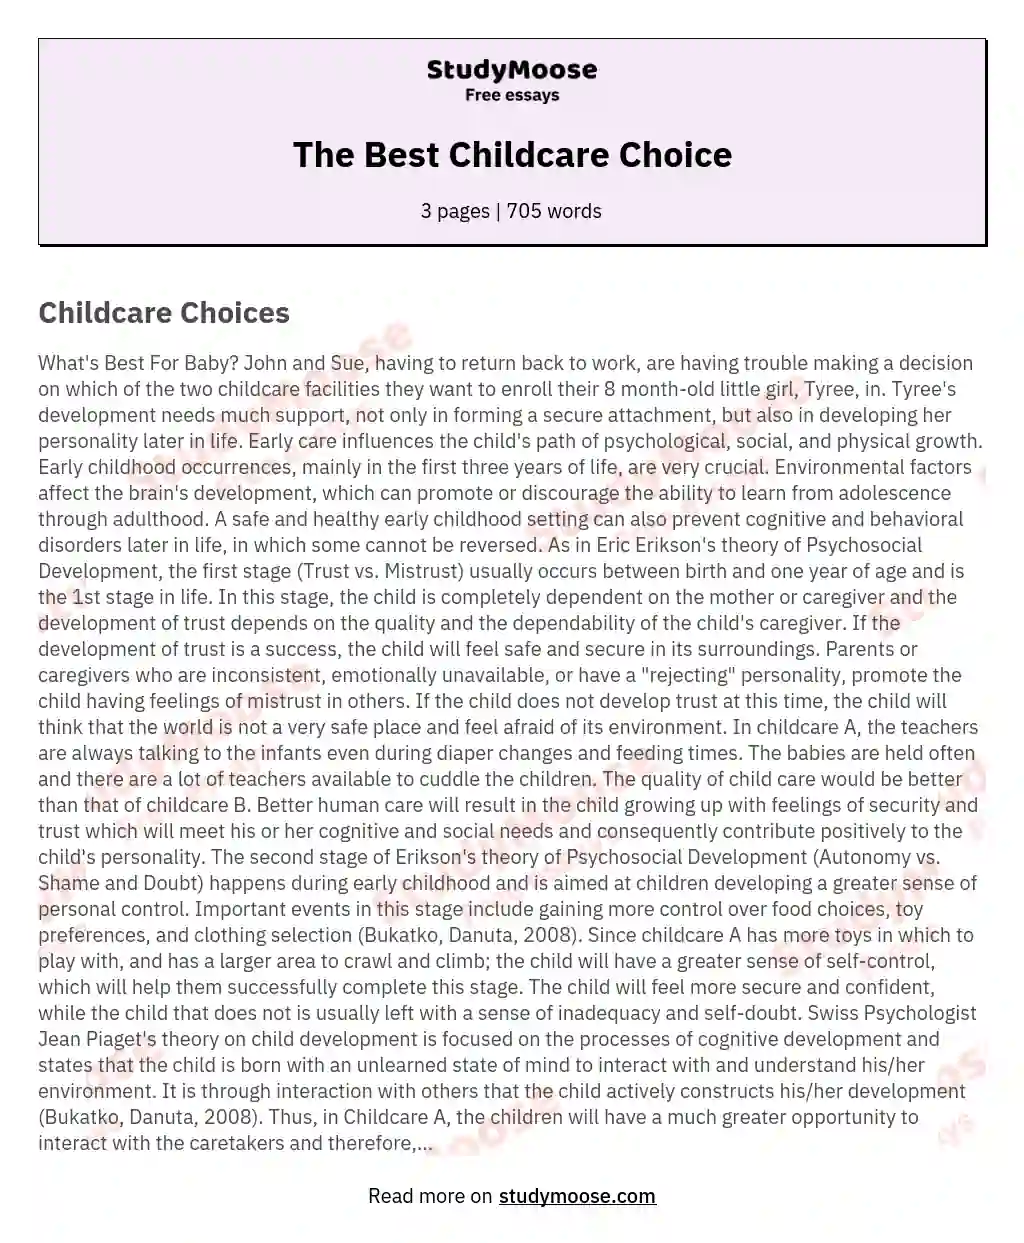 The Best Childcare Choice essay